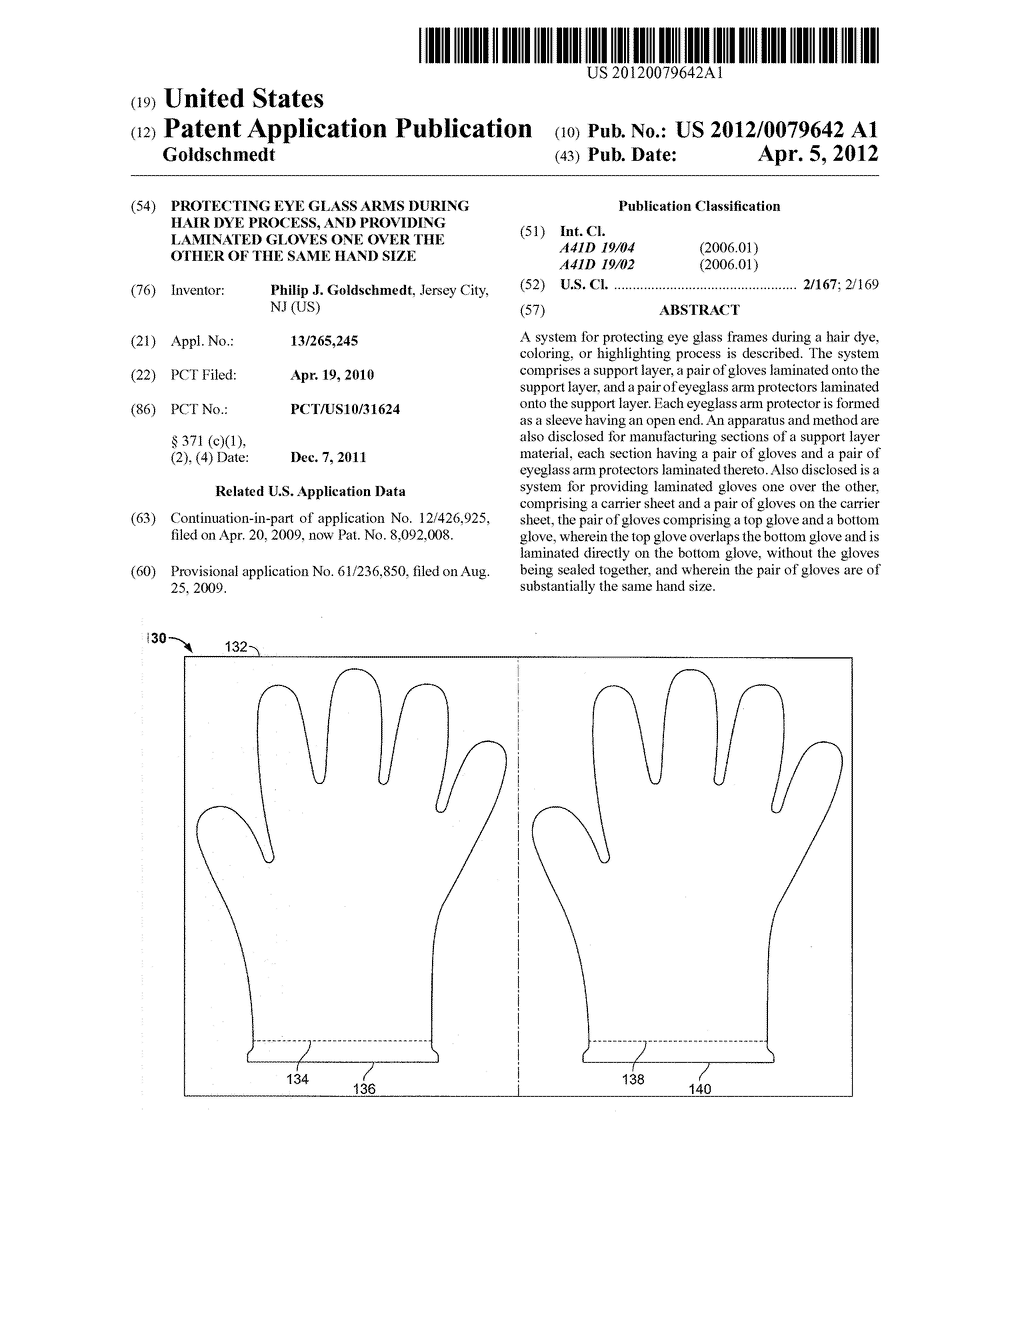 PROTECTING EYE GLASS ARMS DURING HAIR DYE PROCESS, AND PROVIDING LAMINATED     GLOVES ONE OVER THE OTHER OF THE SAME HAND SIZE - diagram, schematic, and image 01